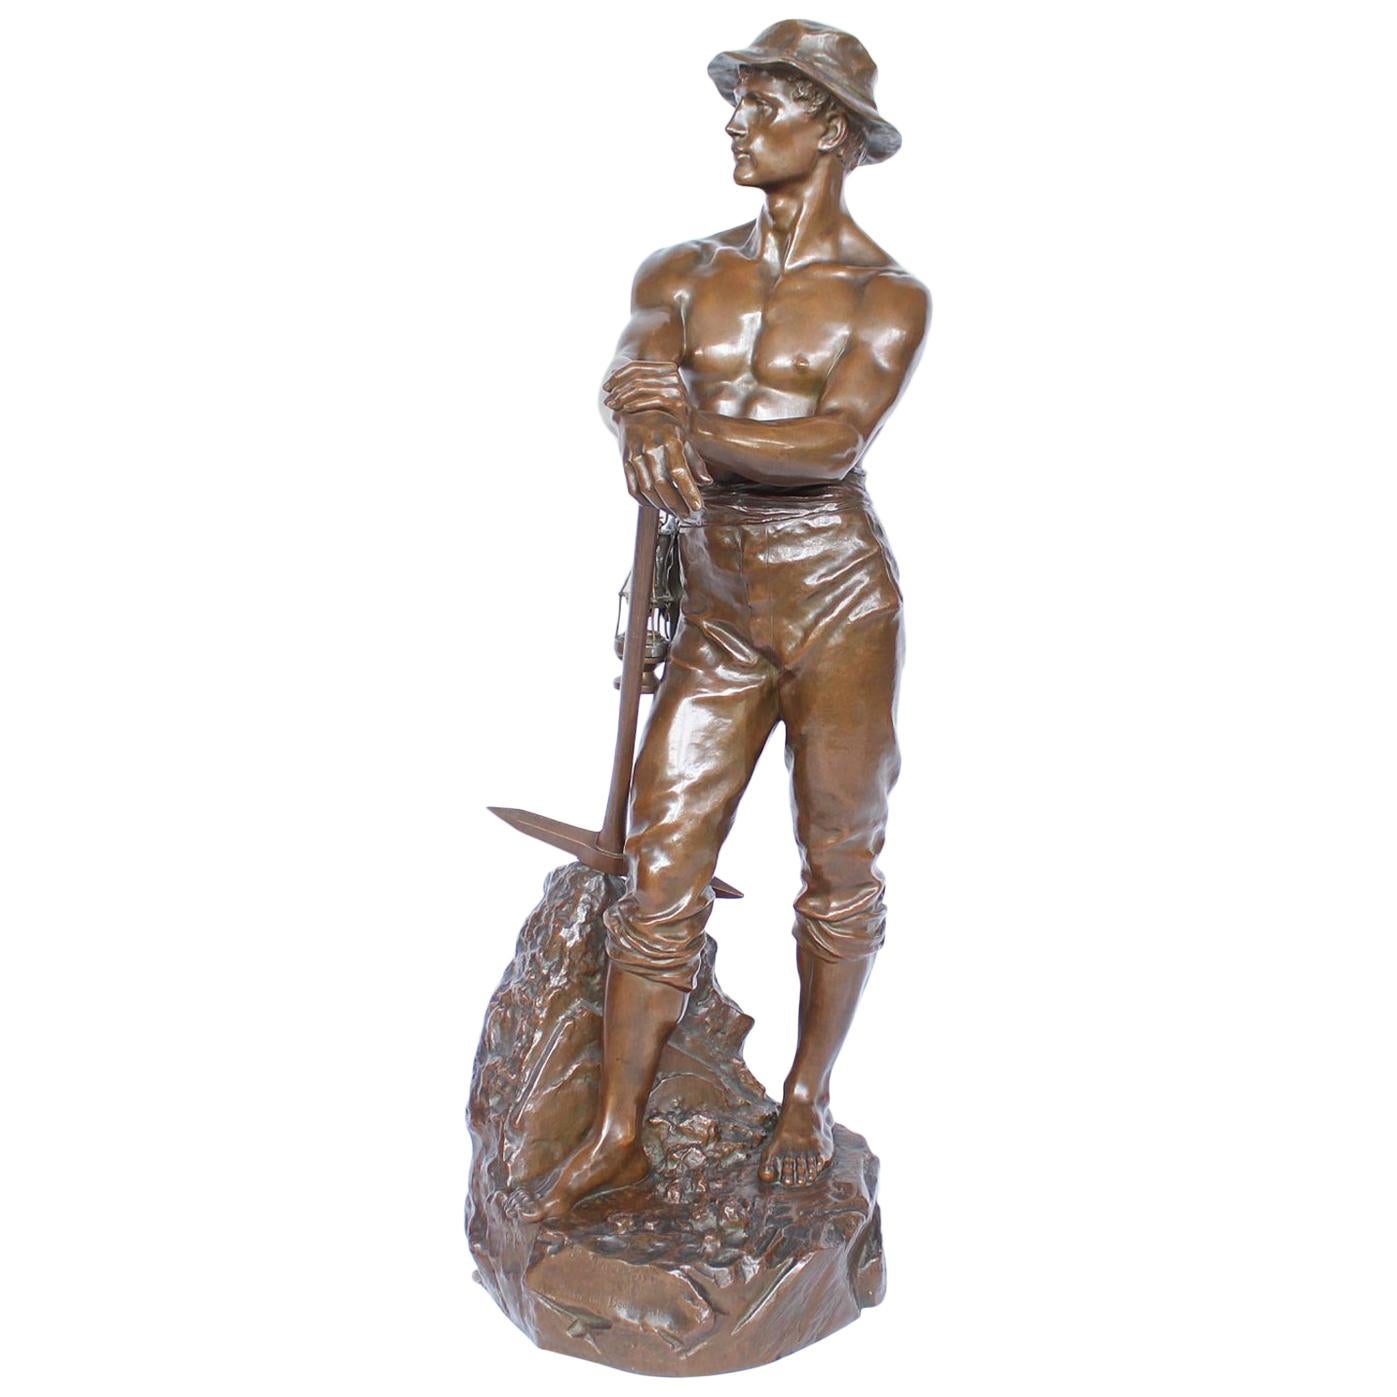 19th Century Large Bronze Sculpture of a Bare Chested Man, French, circa 1890